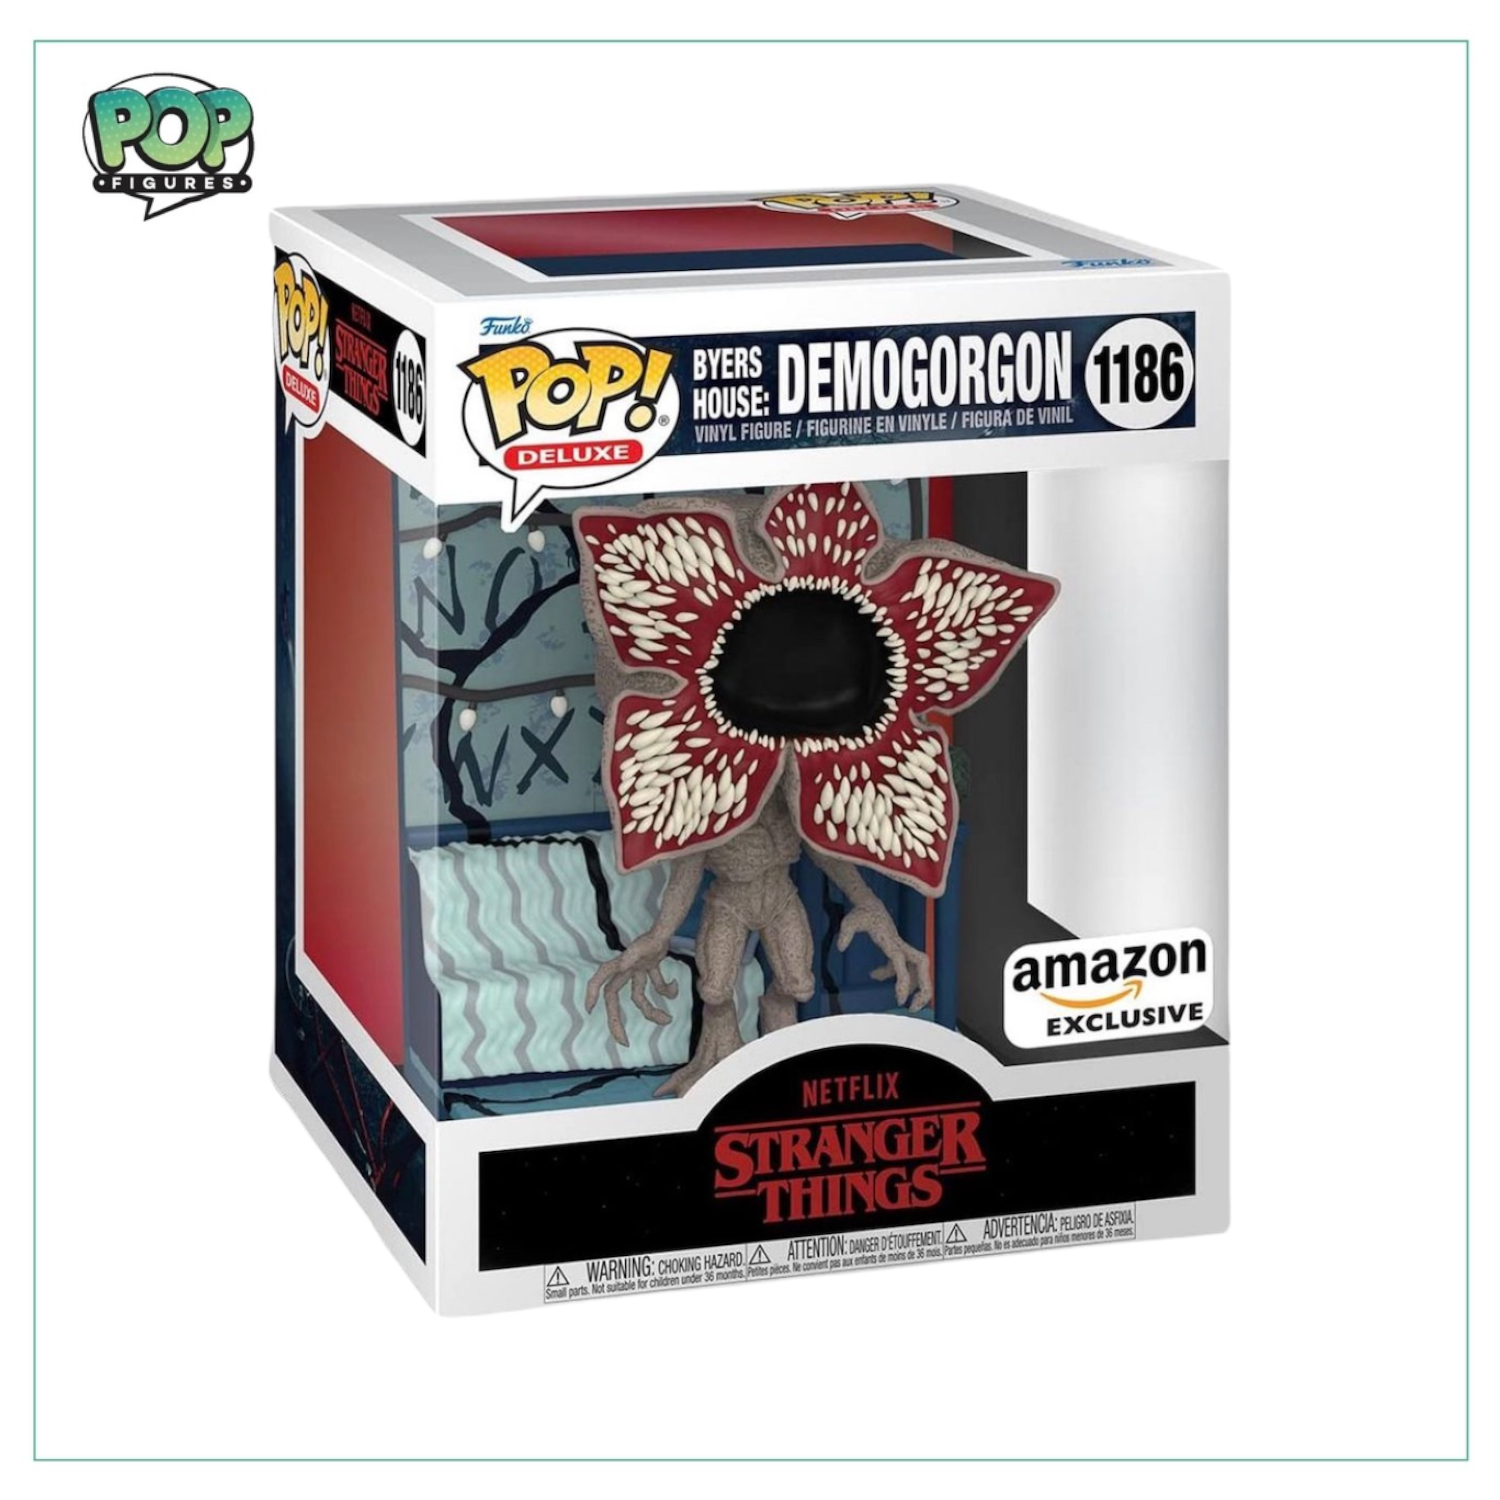 Byers House: Demogorgon #1186 Deluxe Funko Pop! Stranger Things -  Amazon Exclusive - Angry Cat